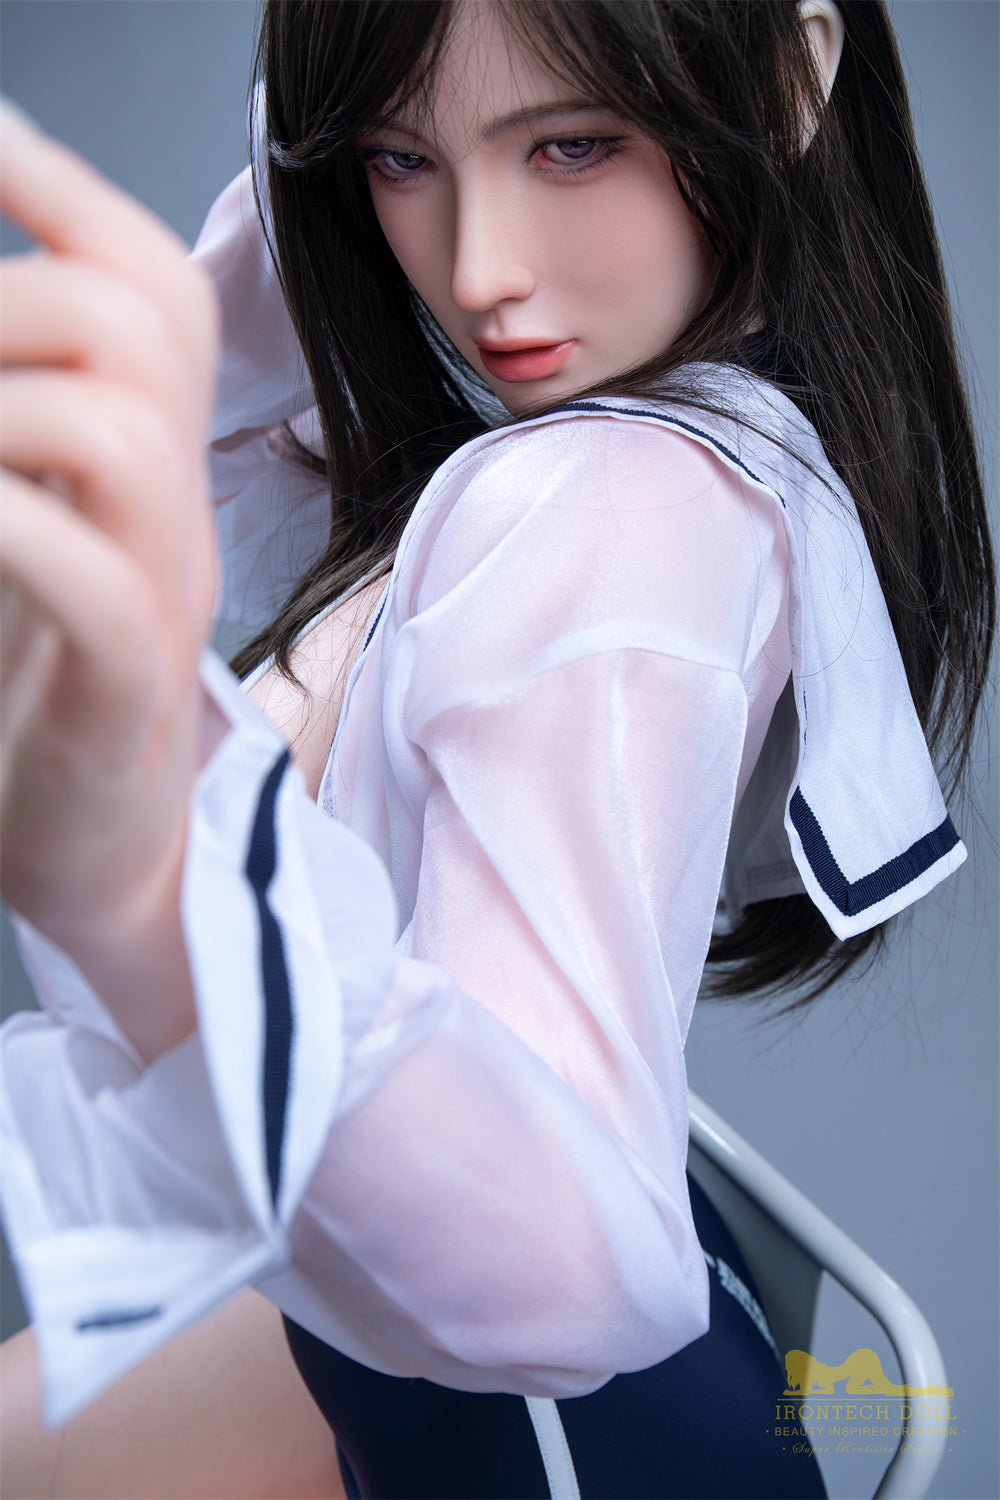 Irontech Doll 164 cm G Silicone - Miya | Buy Sex Dolls at DOLLS ACTUALLY